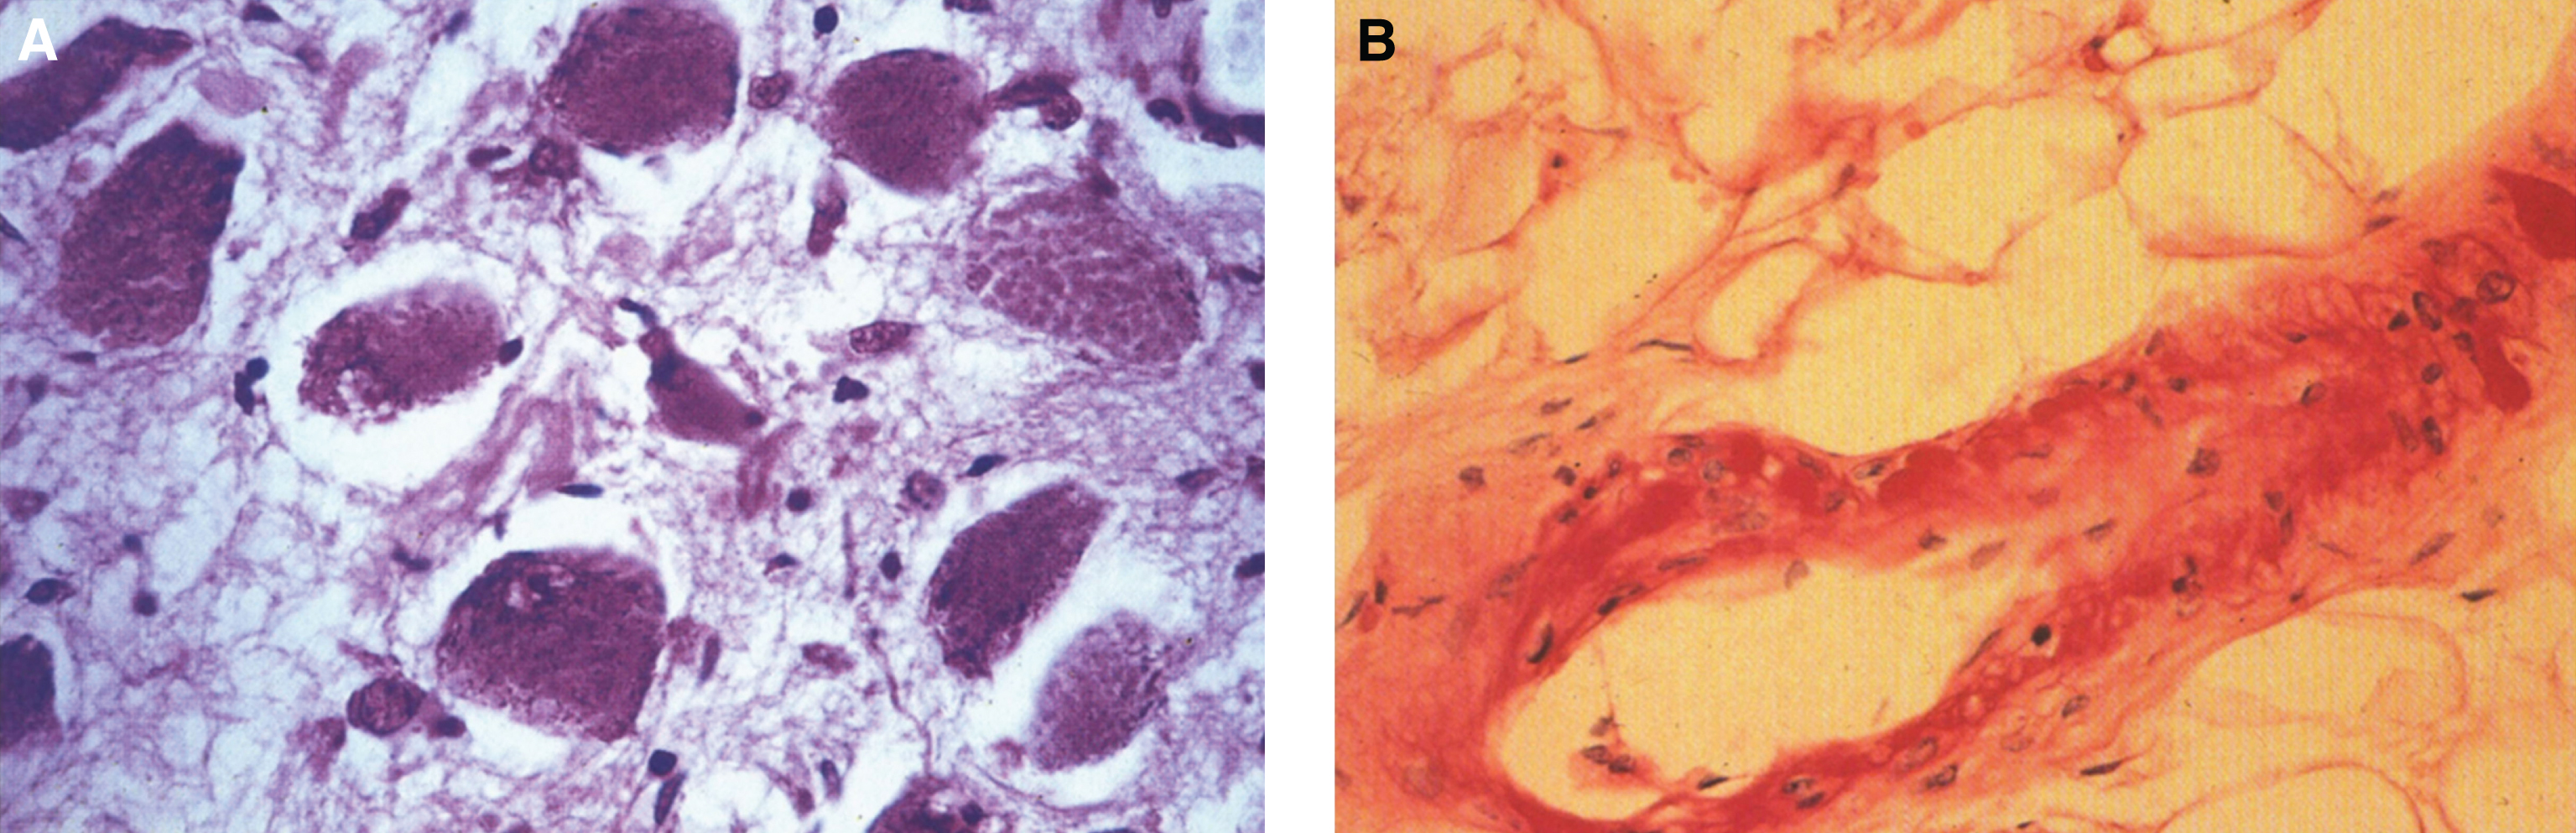 Fabry disease. (A) Microscopic section of the myenteric plexus showing large distended ganglion cells that are PAS-positive. (B) Microscopic section of a blood vessel showing thickening of the vessel wall by accumulation of glycosphingolipid (PAS stain).